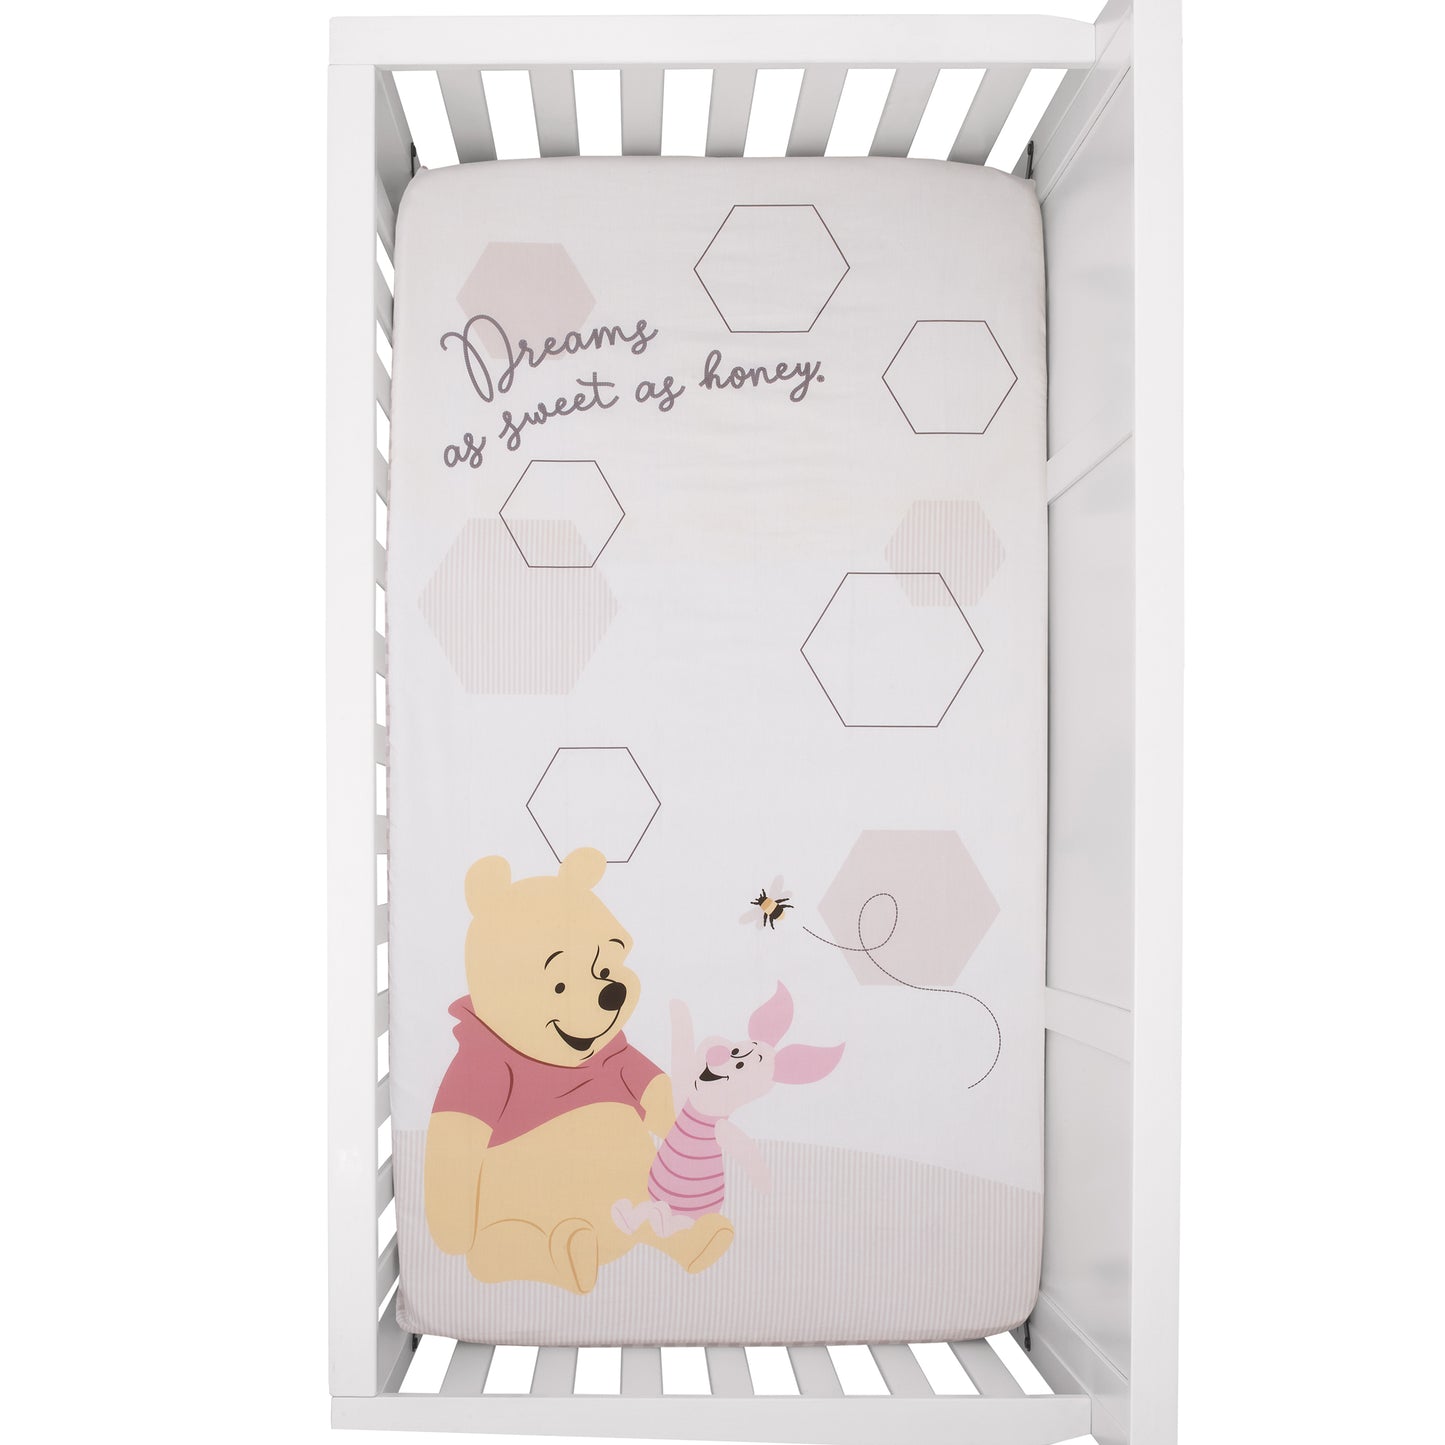 Disney Winnie the Pooh Hugs and Honeycombs Grey and White "Dreams as Sweet as Honey" with Hexagons and Piglet 100% Cotton Photo Op Fitted Crib Sheet